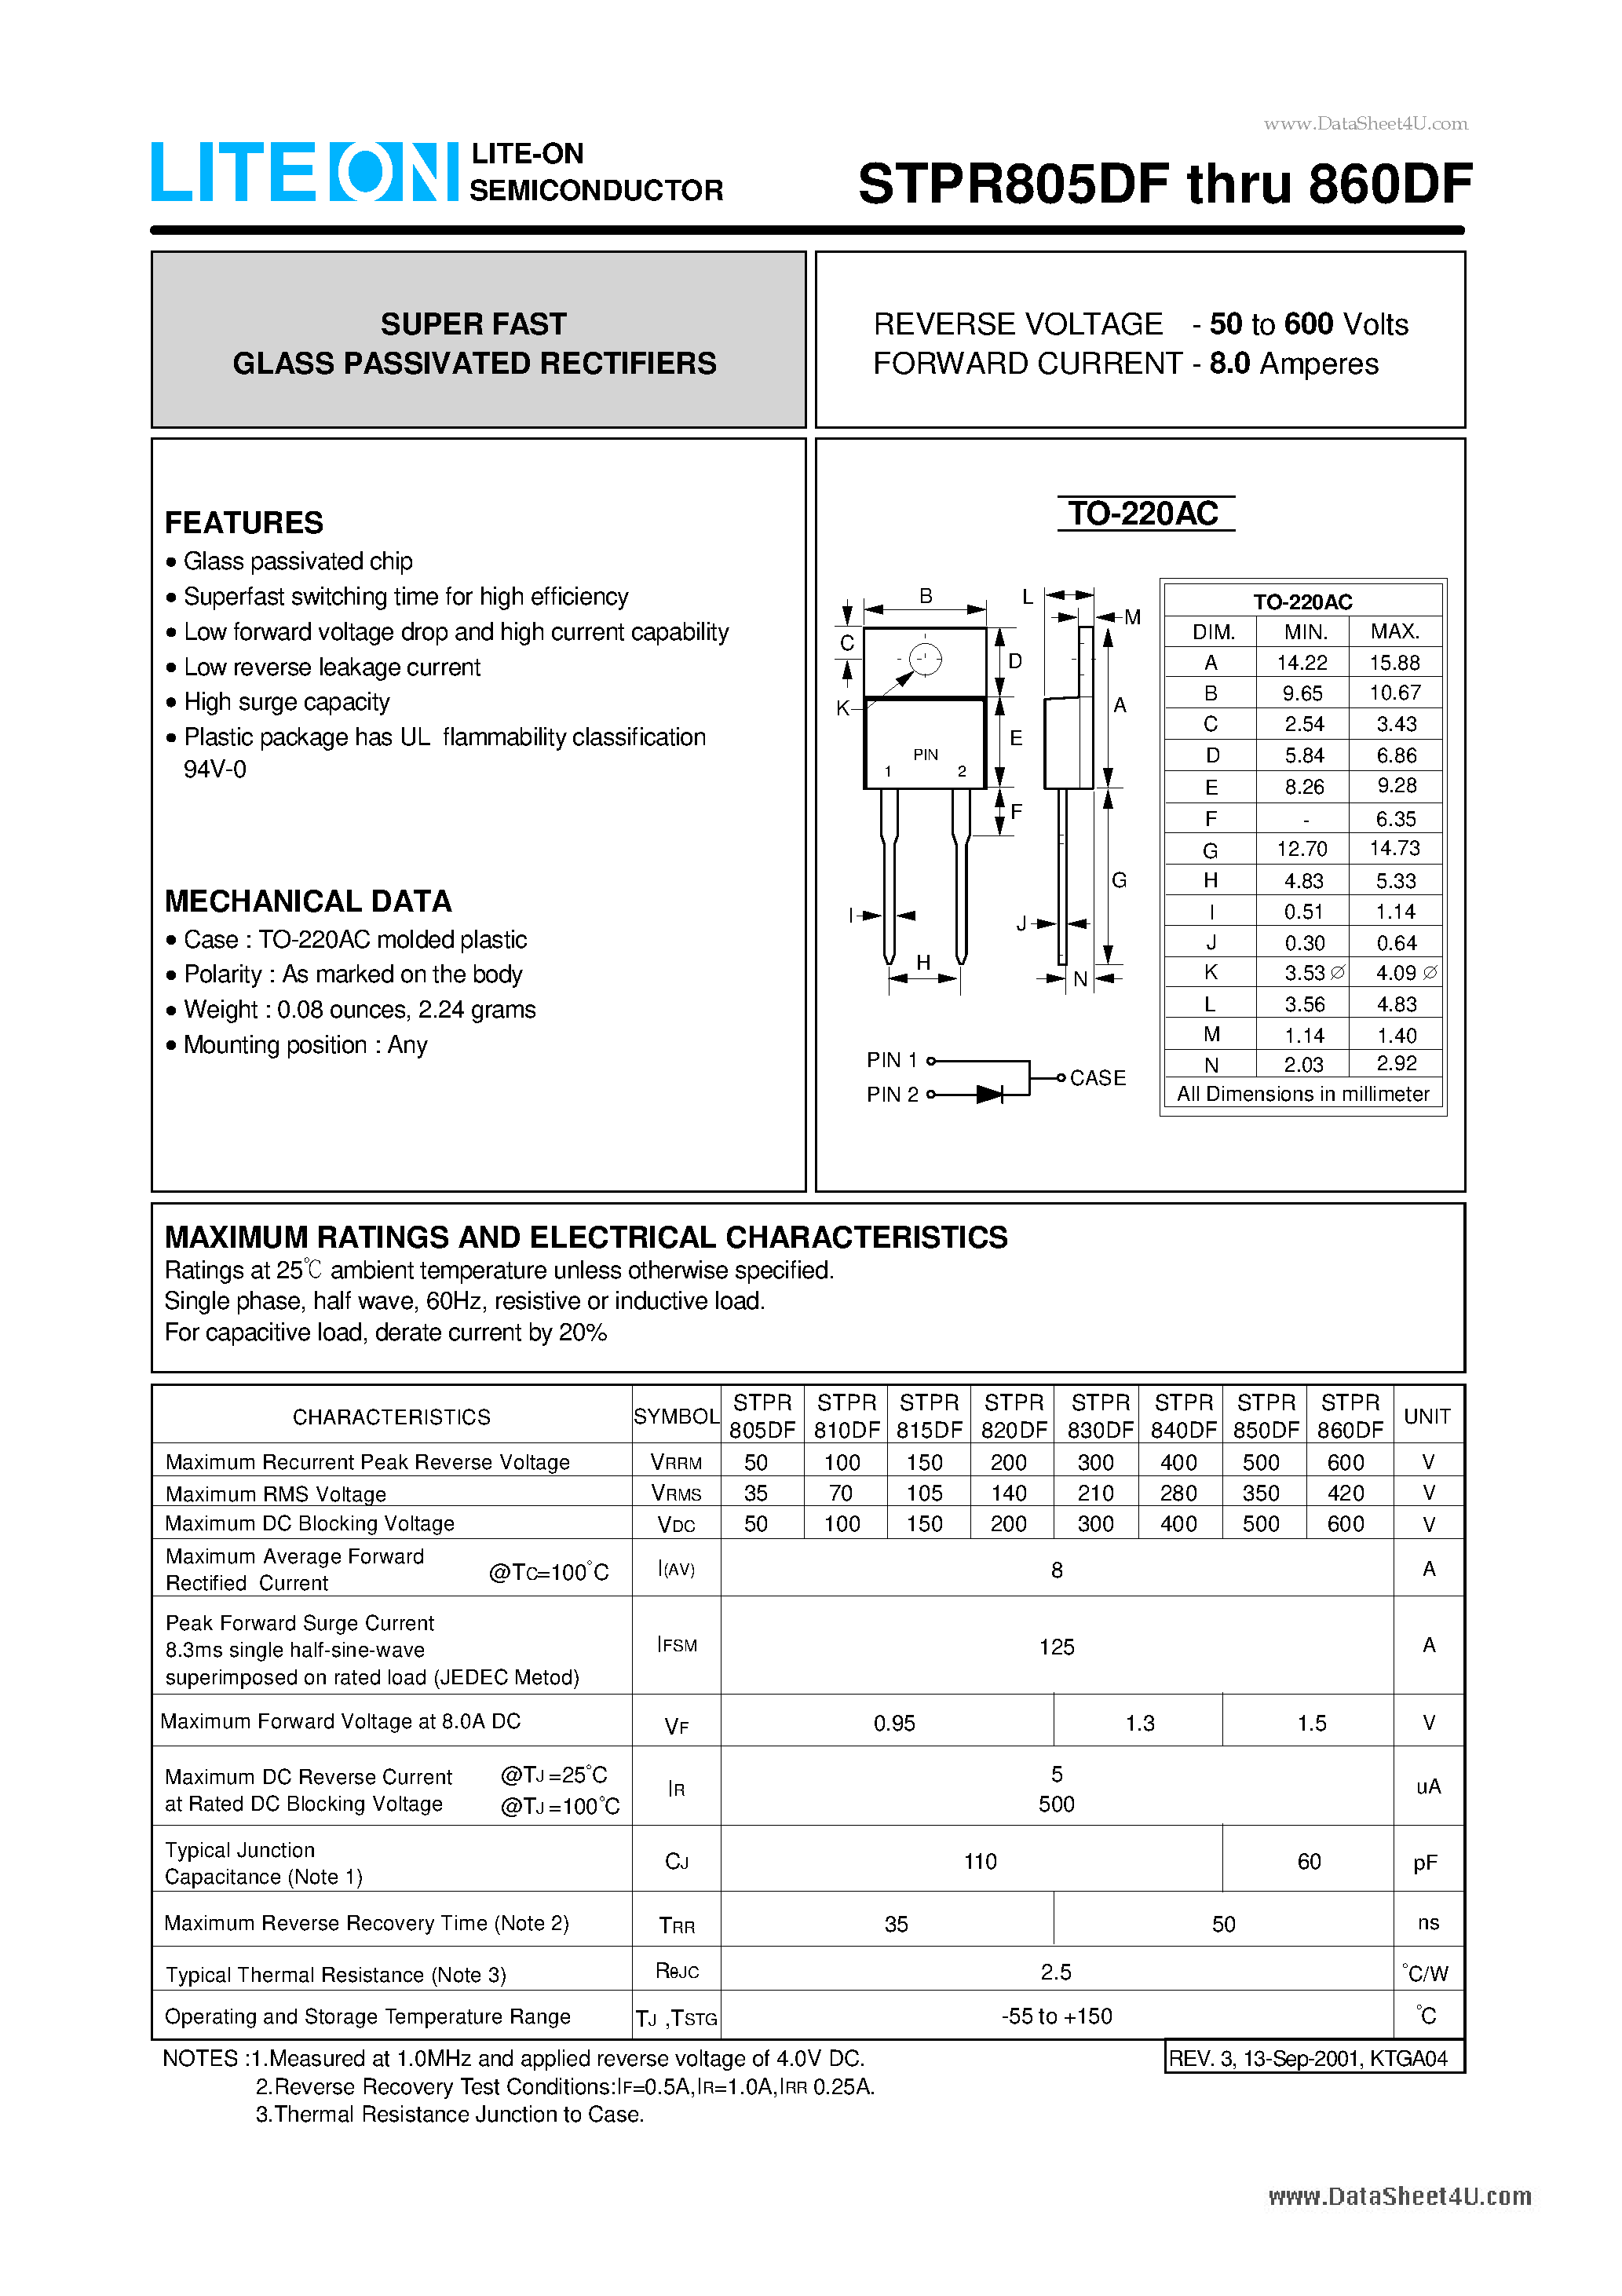 Datasheet STPR805DF - SUPER FAST GLASS PASSIVATED RECTIFIERS page 1